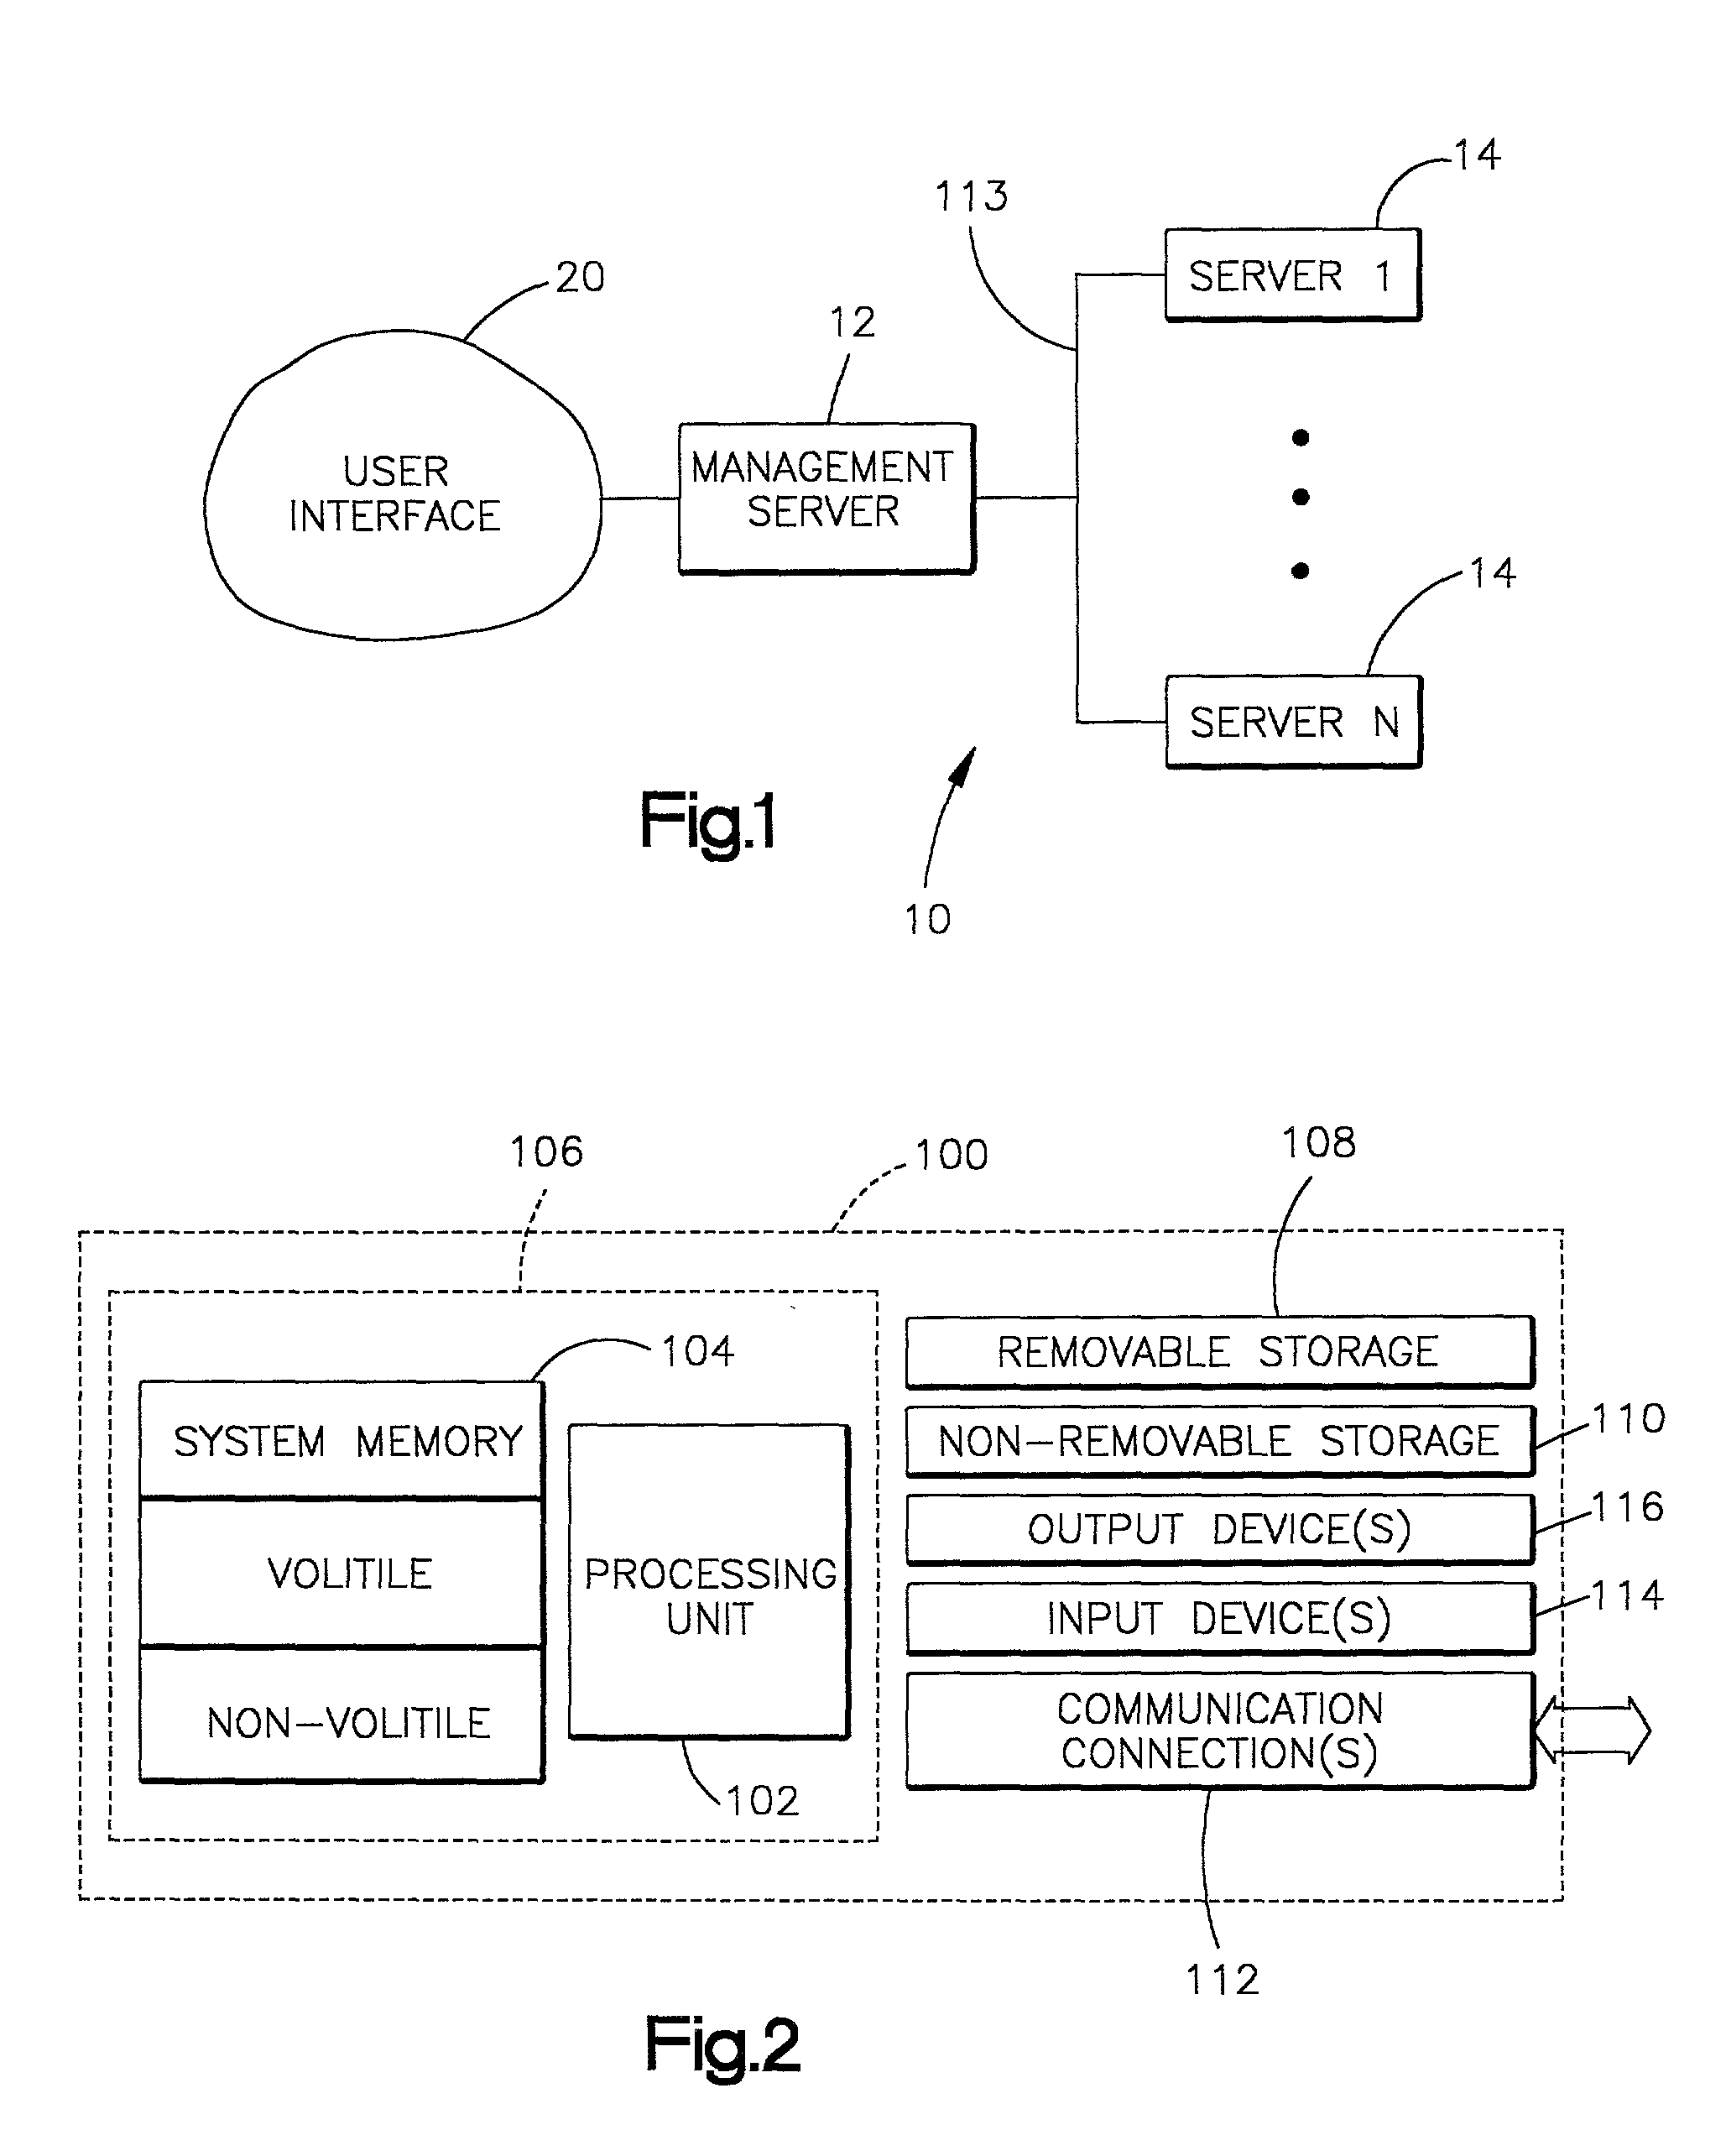 Method and apparatus for managing computing devices on a network